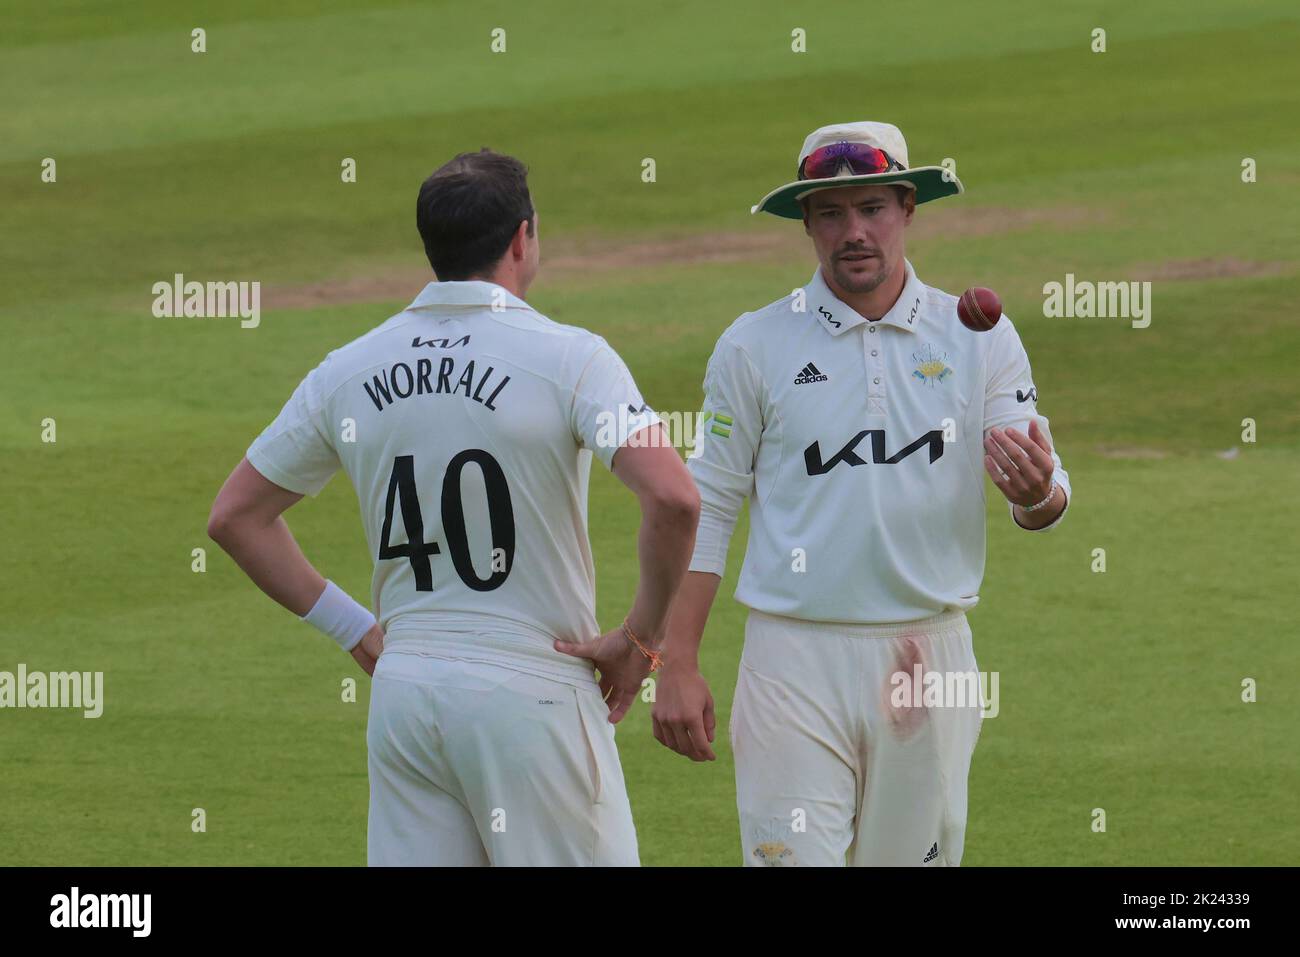 22 September, 2022. London, UK. Surrey’s Dan Worrall and Rory Burns as Surrey take on Yorkshire in the County Championship at the Kia Oval, day three David Rowe/Alamy Live News Stock Photo